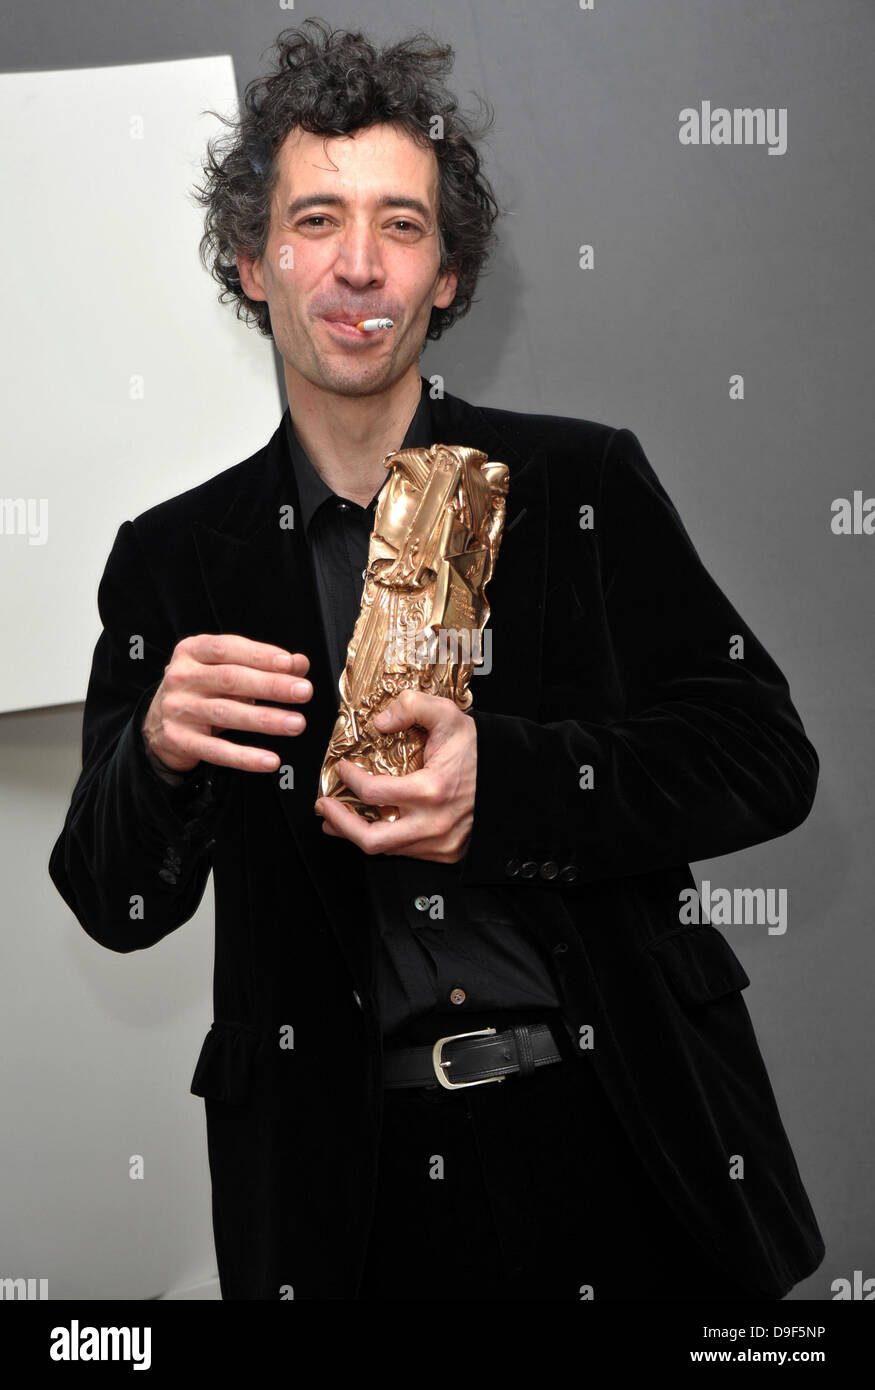 Eric Elmosnino 'Best Actor' The 36th Annual Cesar Awards 2011 held at the Theatre du Chatelet - Photocall Paris, France - 25.02.11 Stock Photo